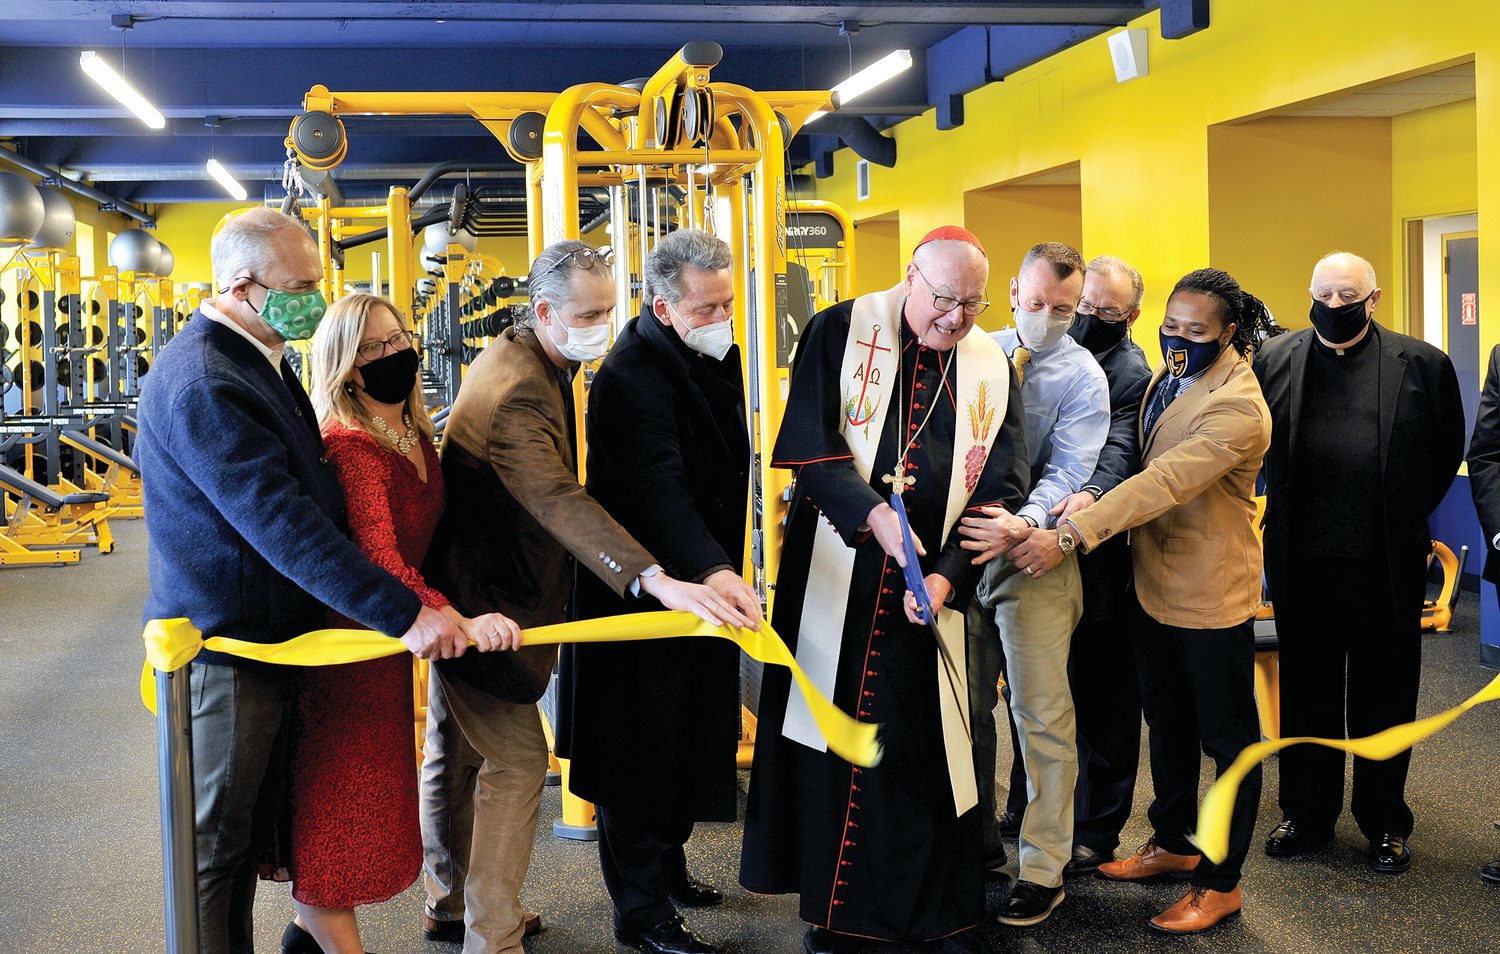 Cardinal Dolan cuts ribbon during the dedication and blessing of the new health and wellness center at Our Lady of Lourdes High School in Poughkeepsie Feb. 10. Standing, from left, are Tom Kelly, executive chairman, board of trustees; Catherine Merryman, principal; Genaro Argenio, former executive chairman, board of trustees; Hal Pontez, benefactor; Bill Kyle, athletic director; Mike Krieger, assistant principal for academics; Miles Hansen, athletic trainer; and Msgr. Joseph LaMorte, vicar general and moderator of the curia for the archdiocese.